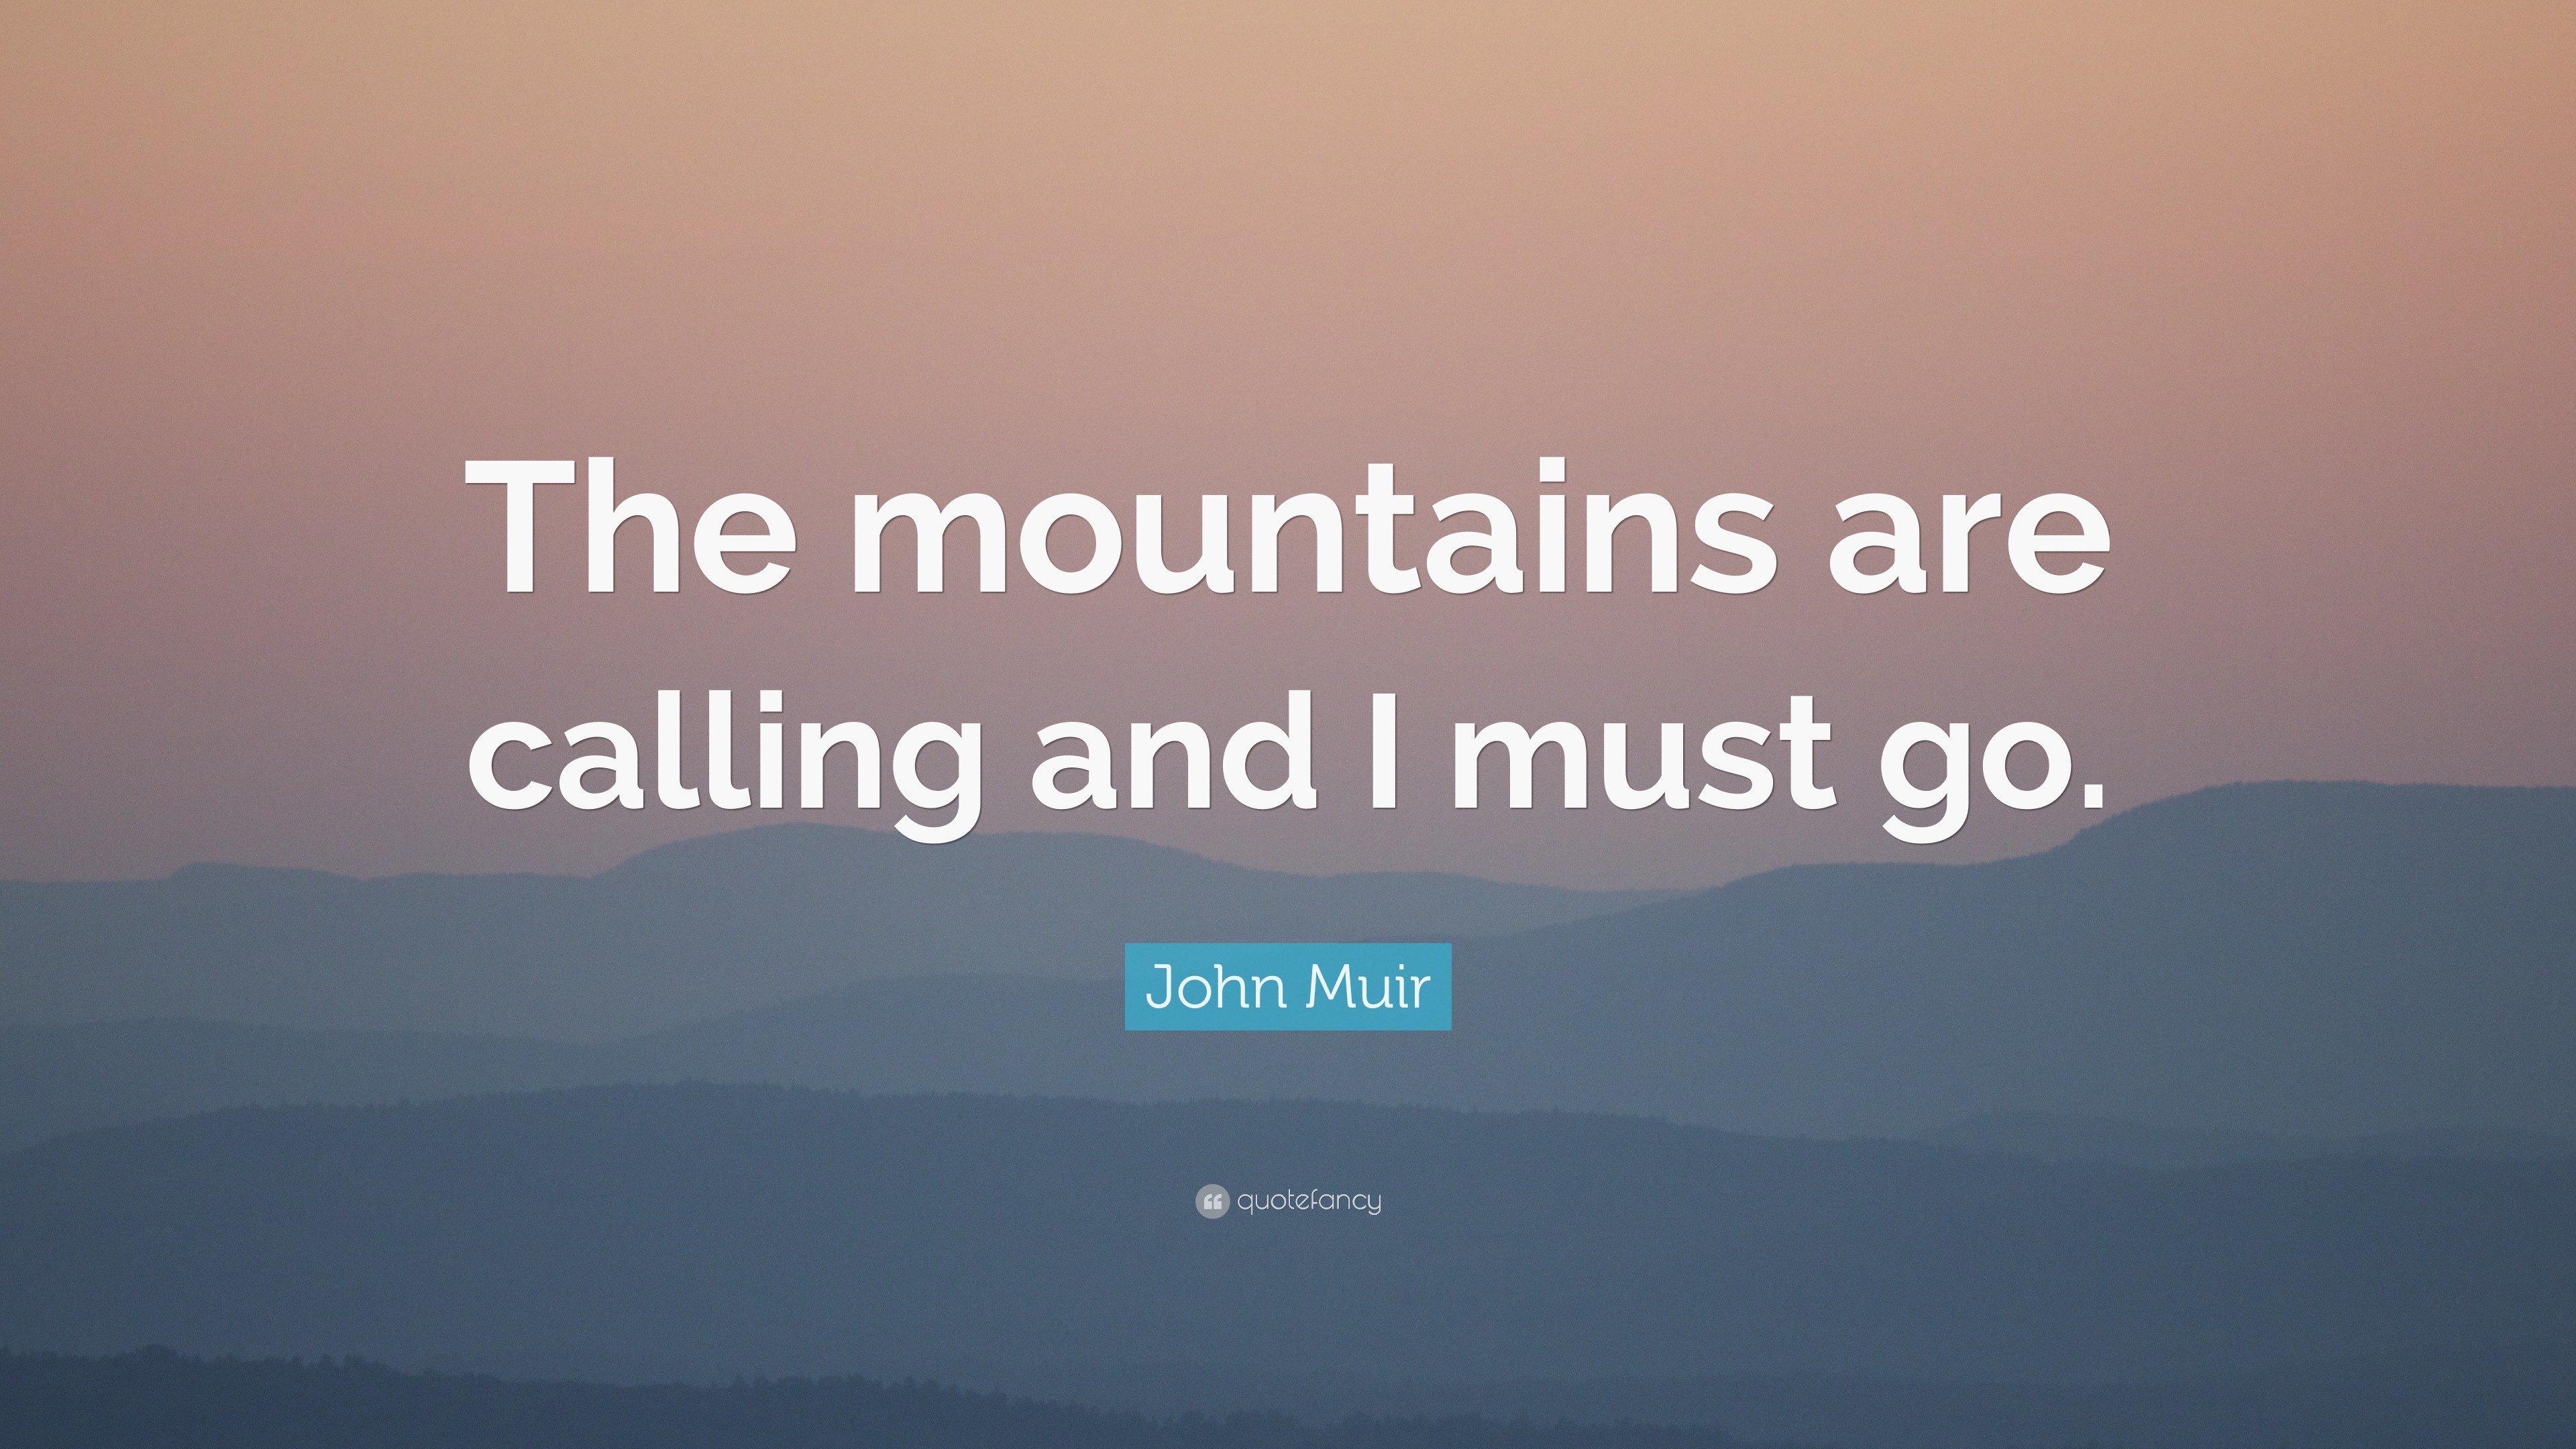 Download John Muir Quote: "The mountains are calling and I must go ...